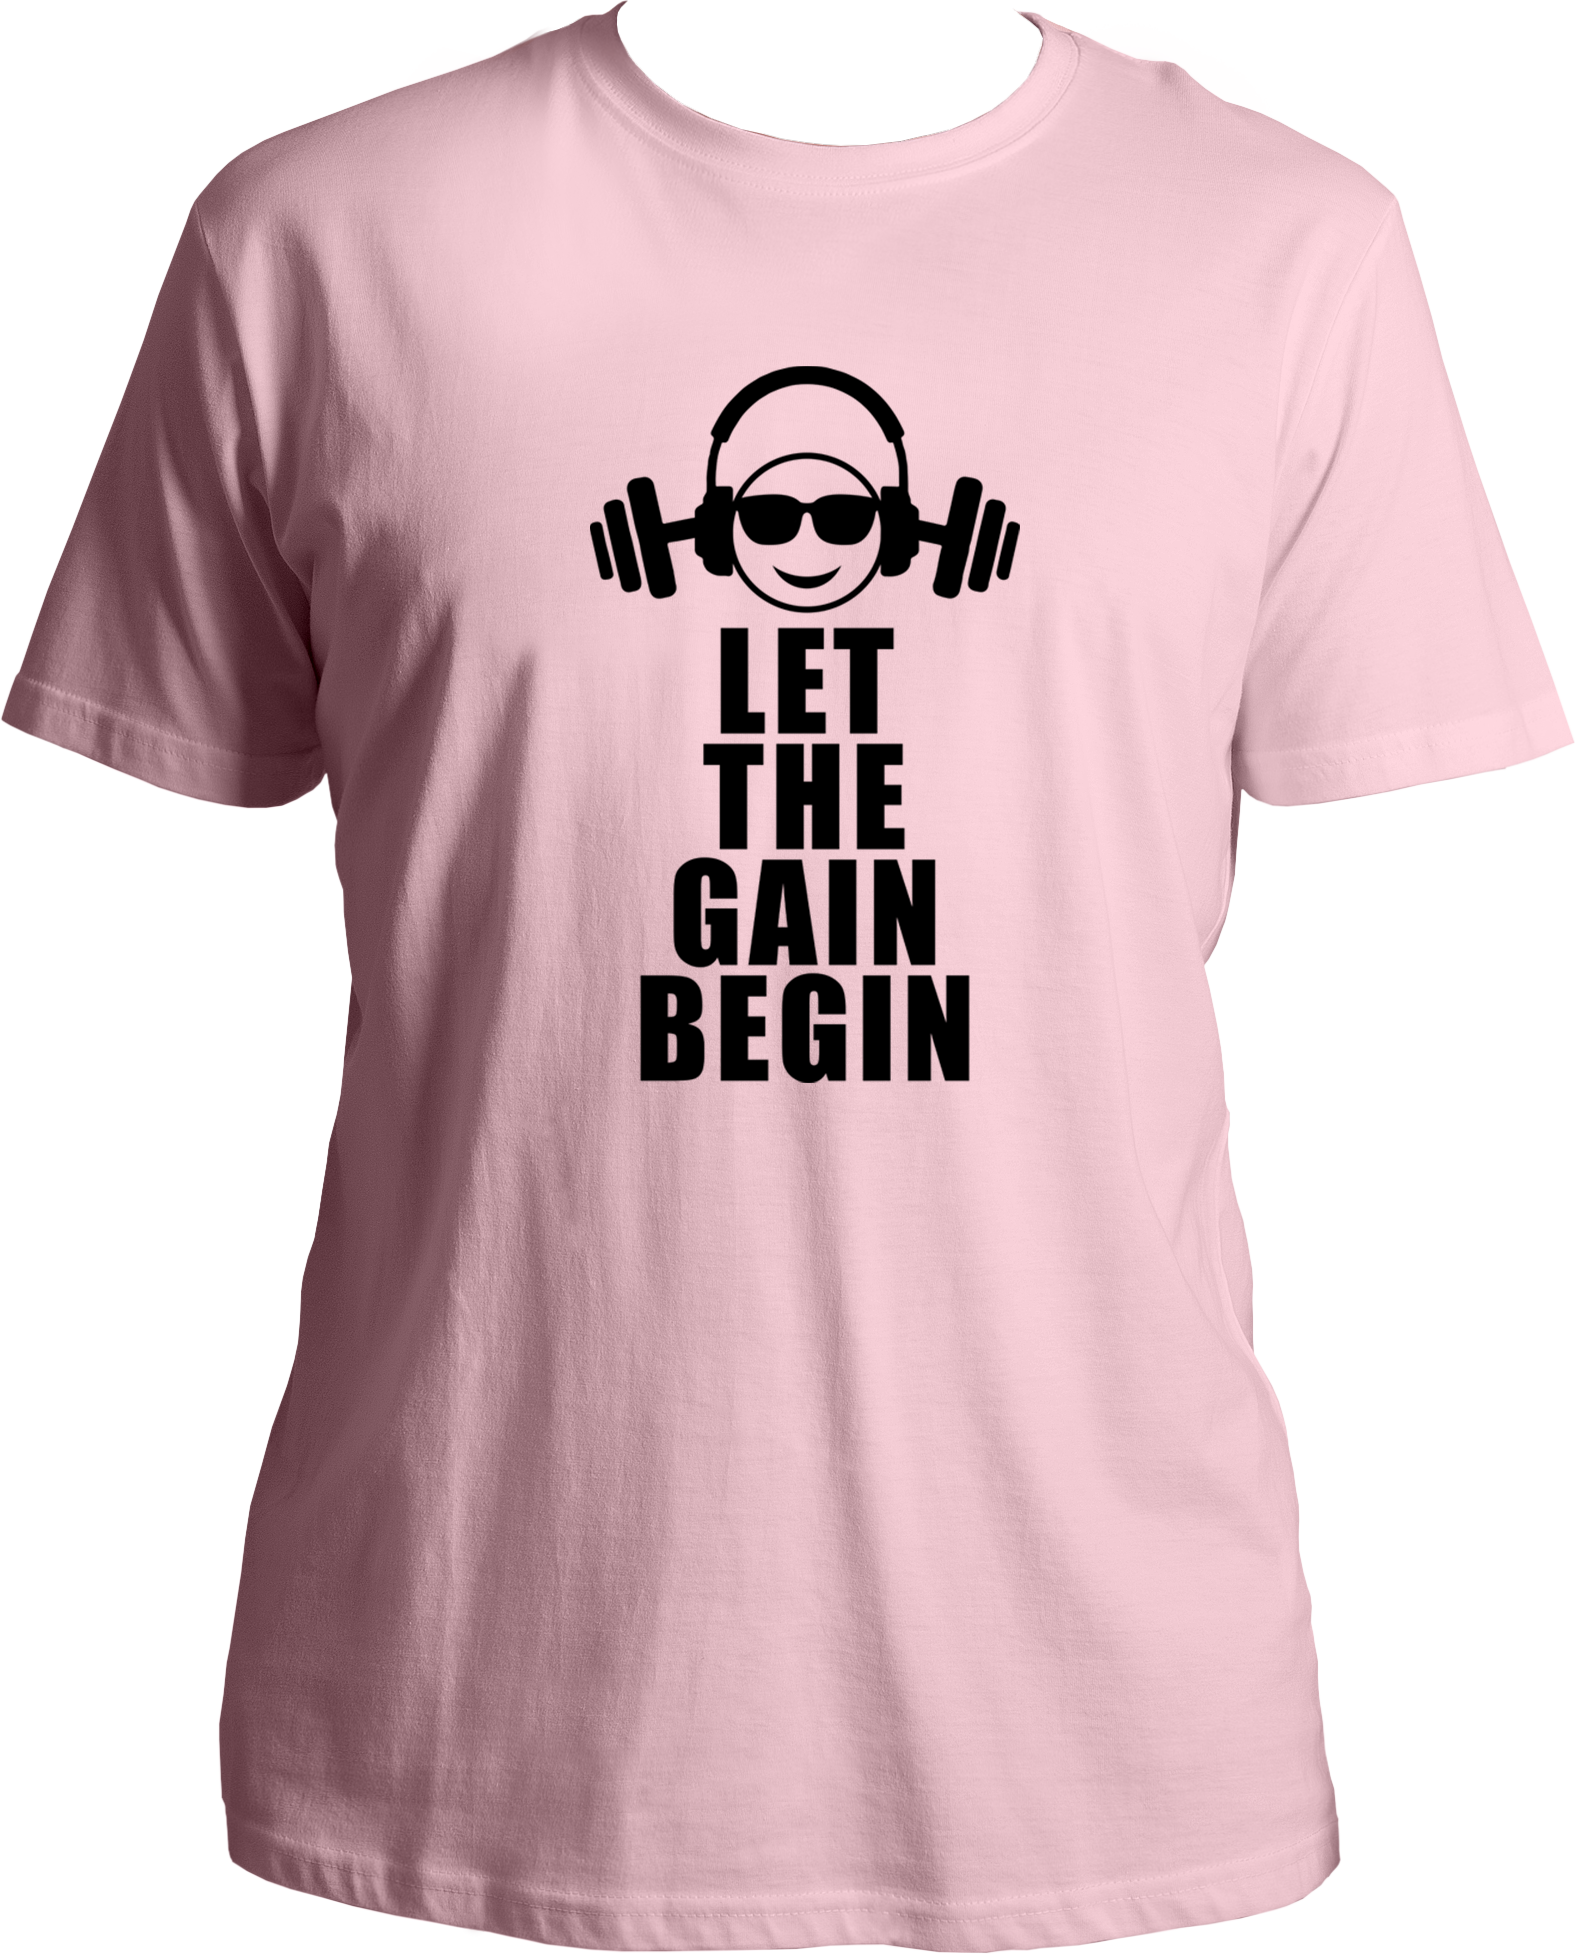 Get your gym chic on with Garrari's special Let The Gain Begin Unisex T-Shirts! These stylish tees will make your workout extra special - no more boring, basic 'fits! From the gym to the streets, these threads will keep you looking fresh and fly. Let the gains commence!